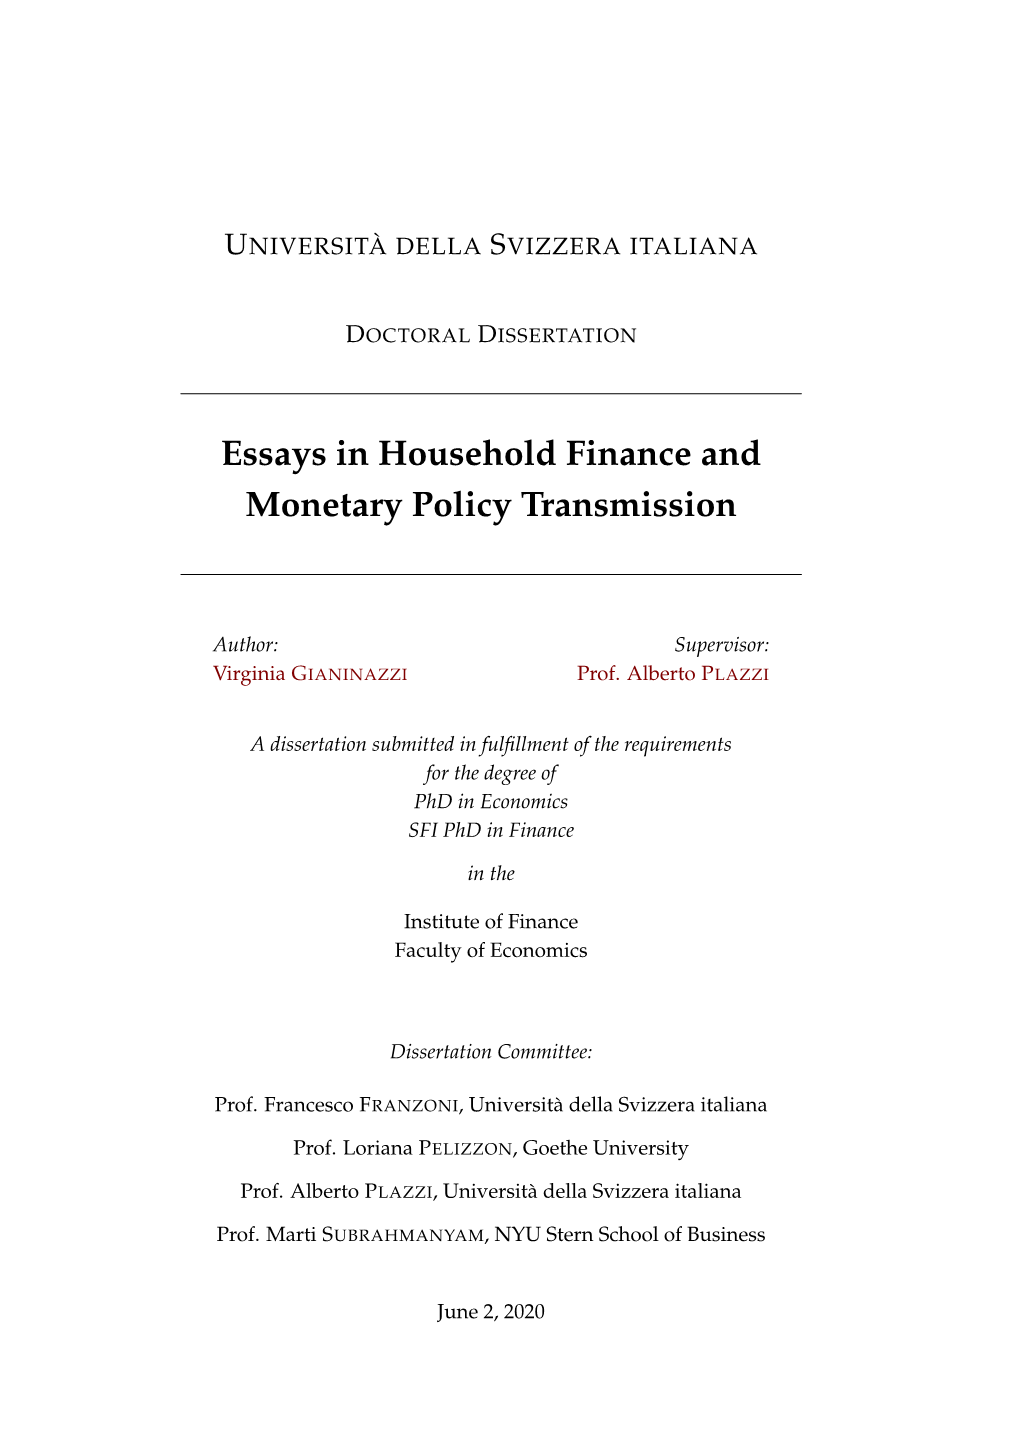 Essays in Household Finance and Monetary Policy Transmission